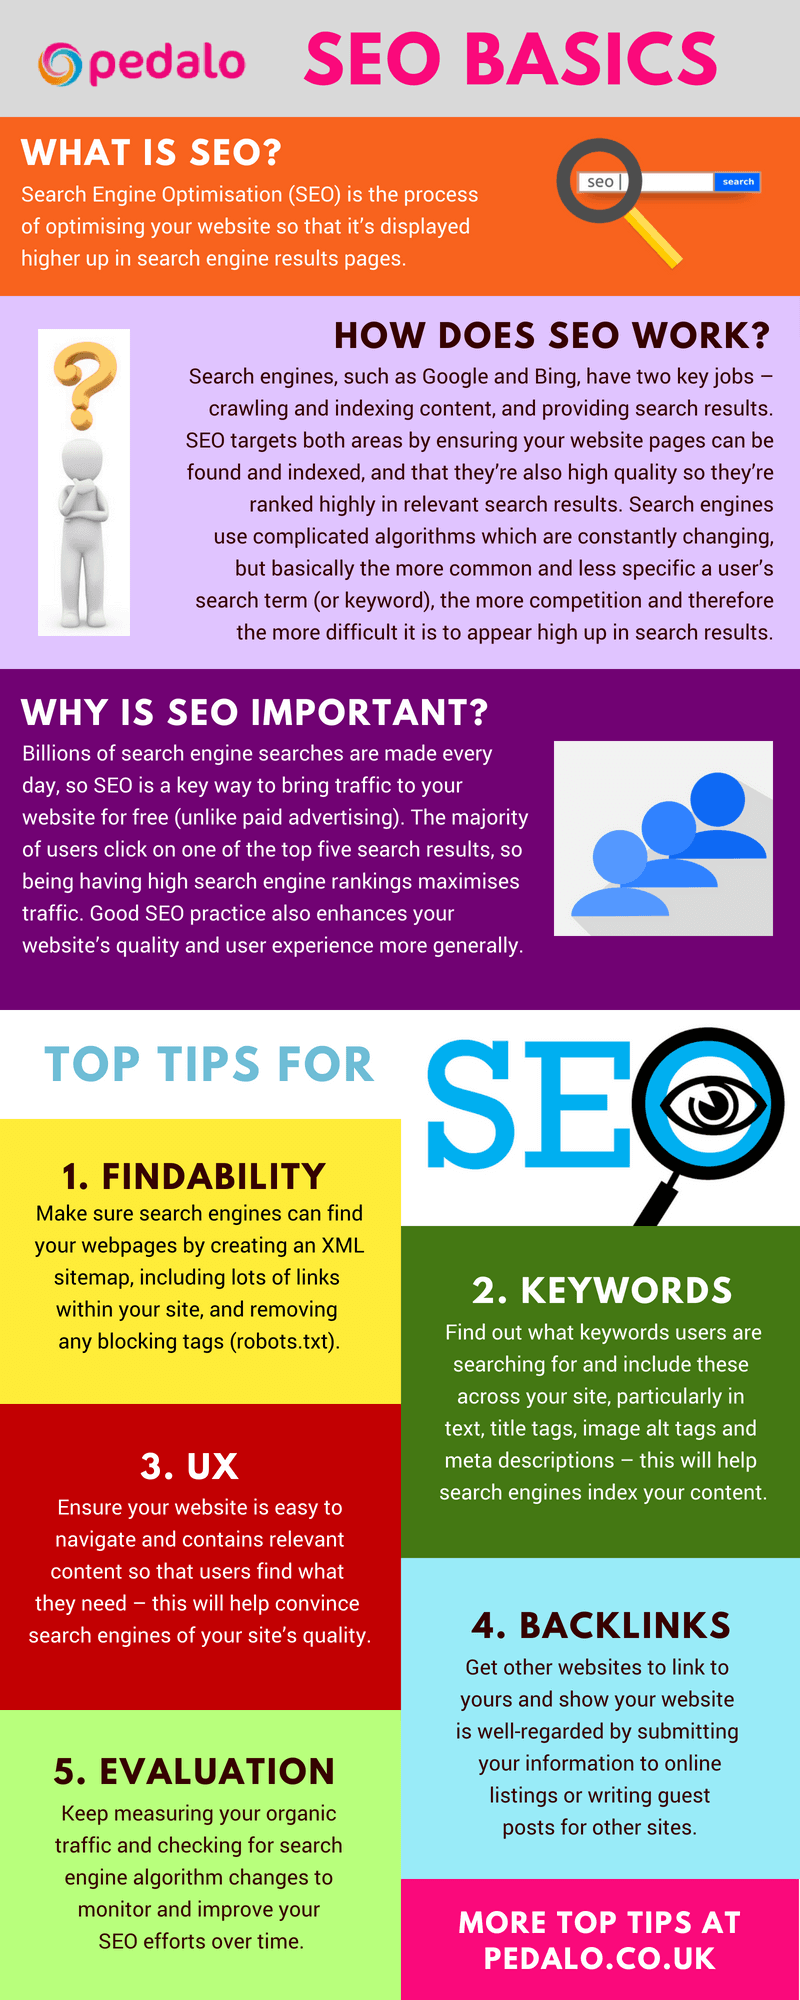 SEO-infographic by Pedalo